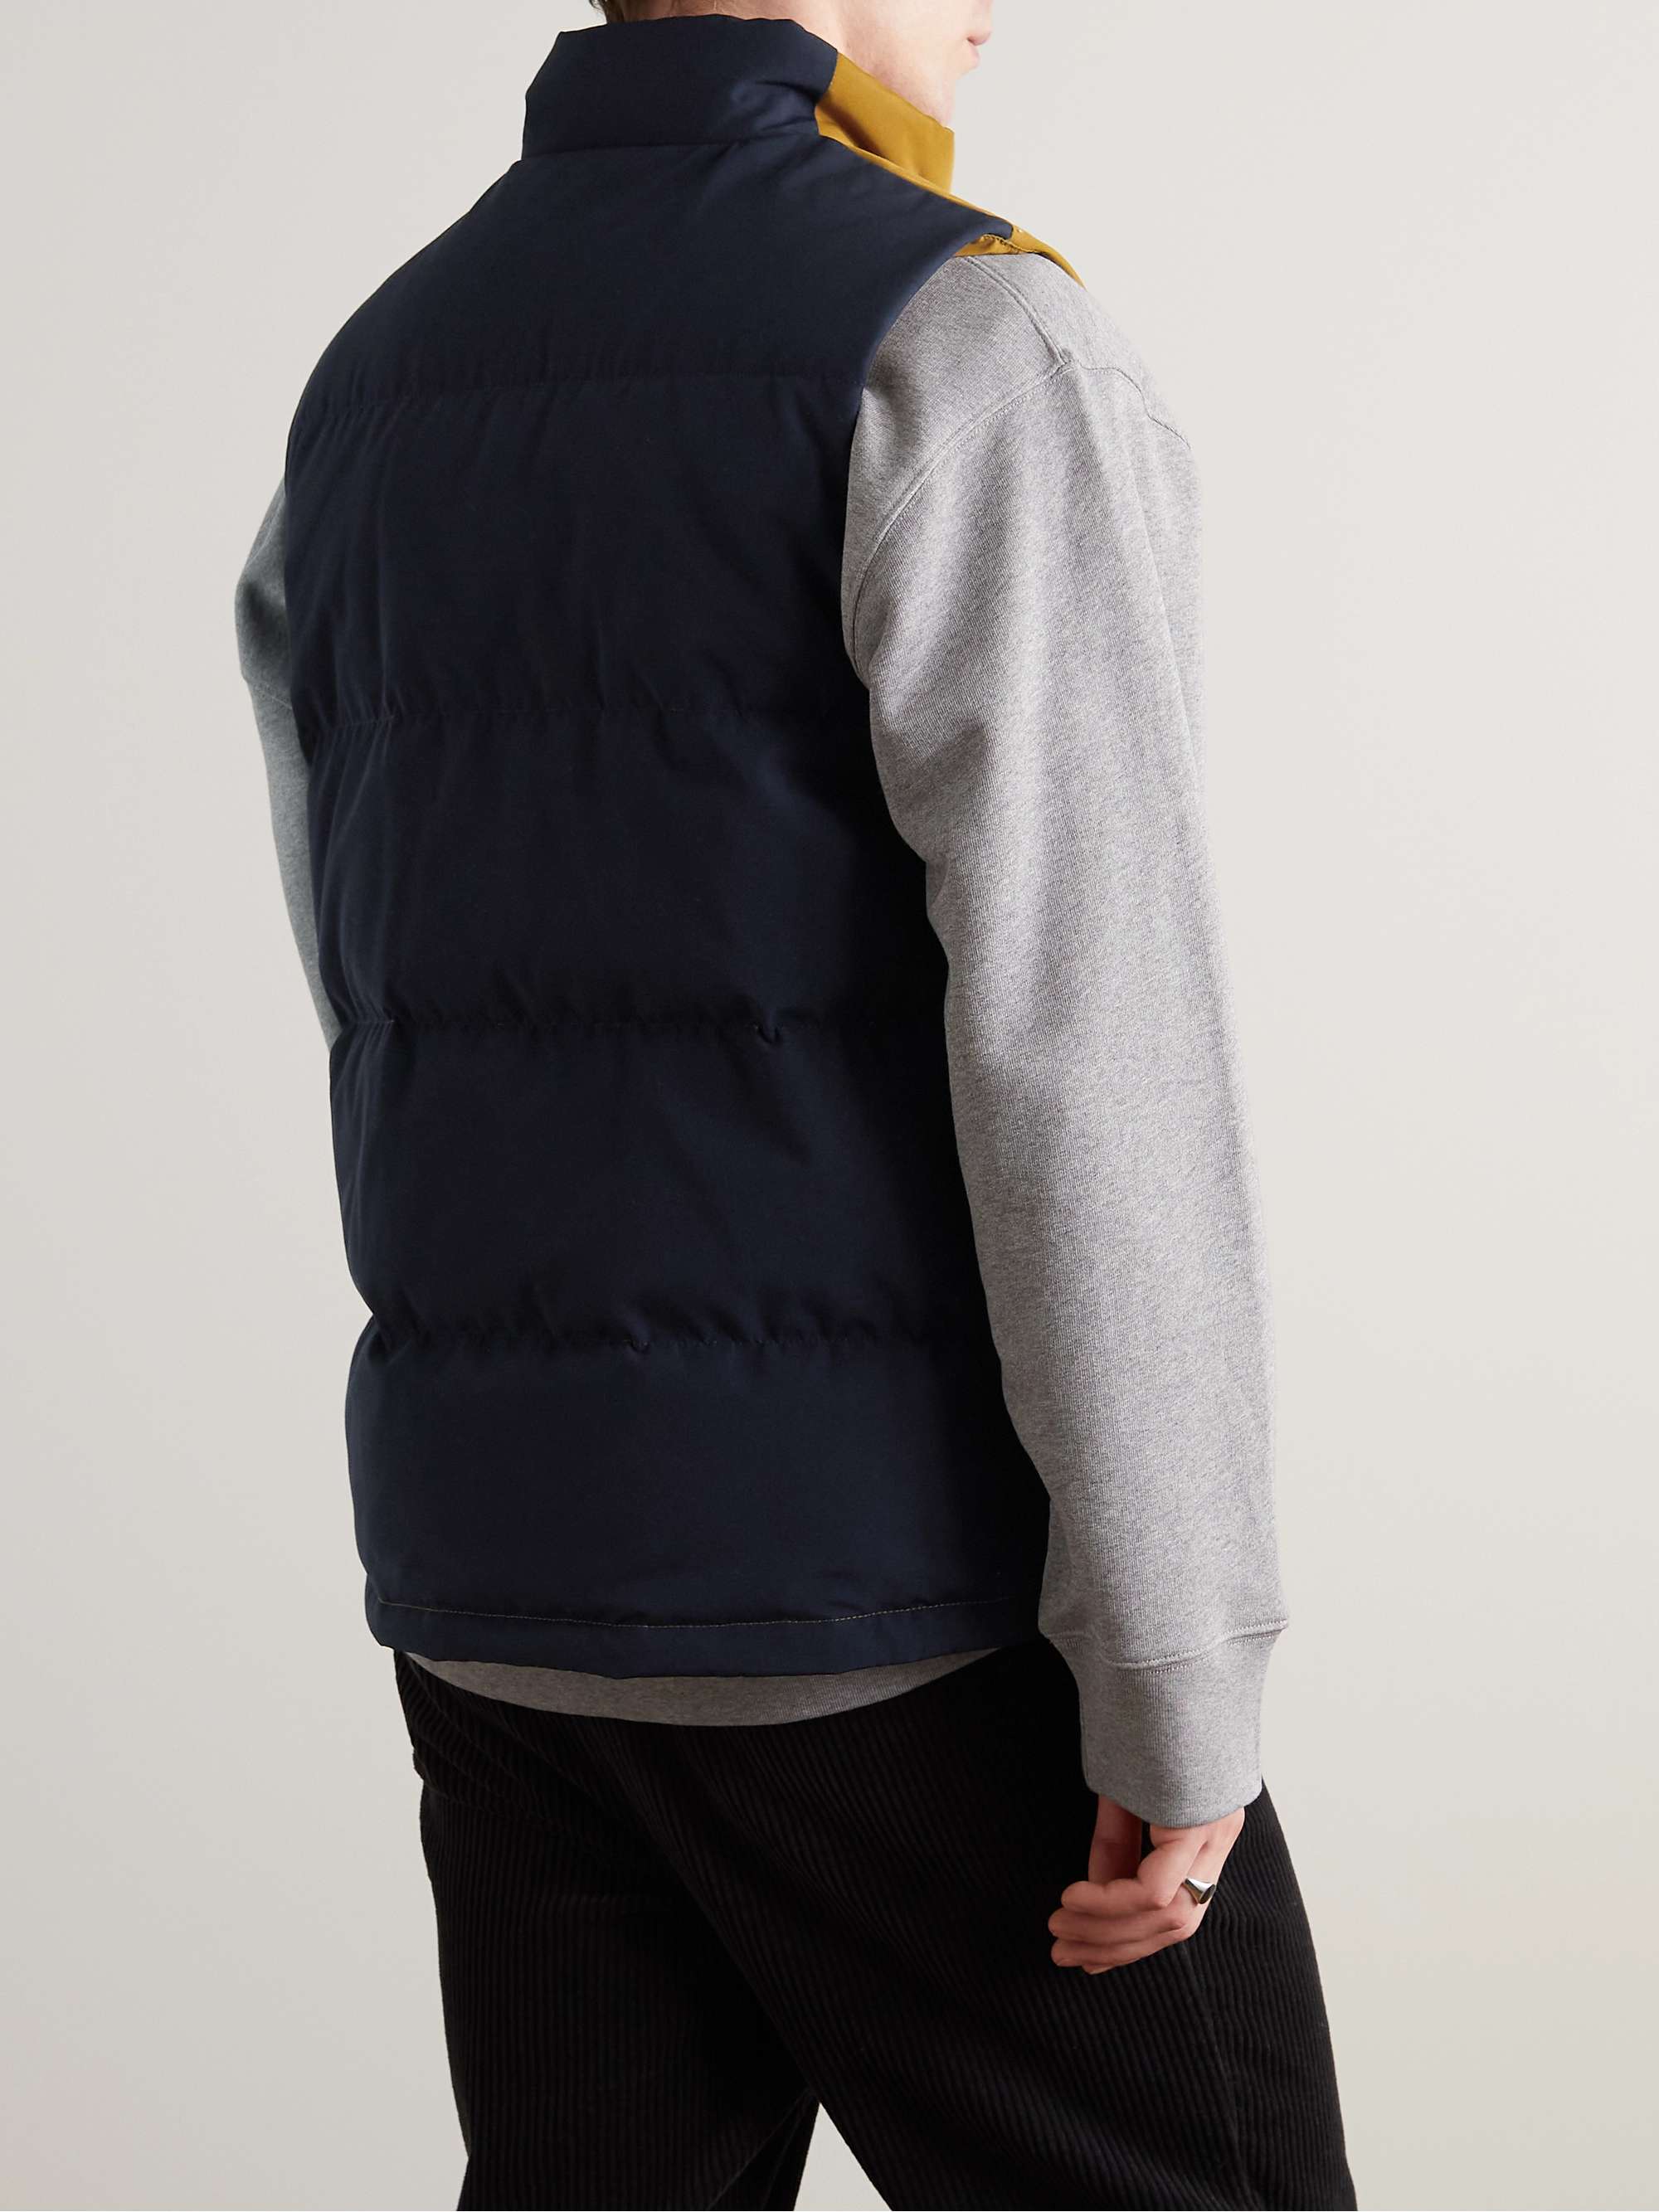 CANADA GOOSE Freestyle Regeneration Two-Tone Quilted Shell Down Gilet